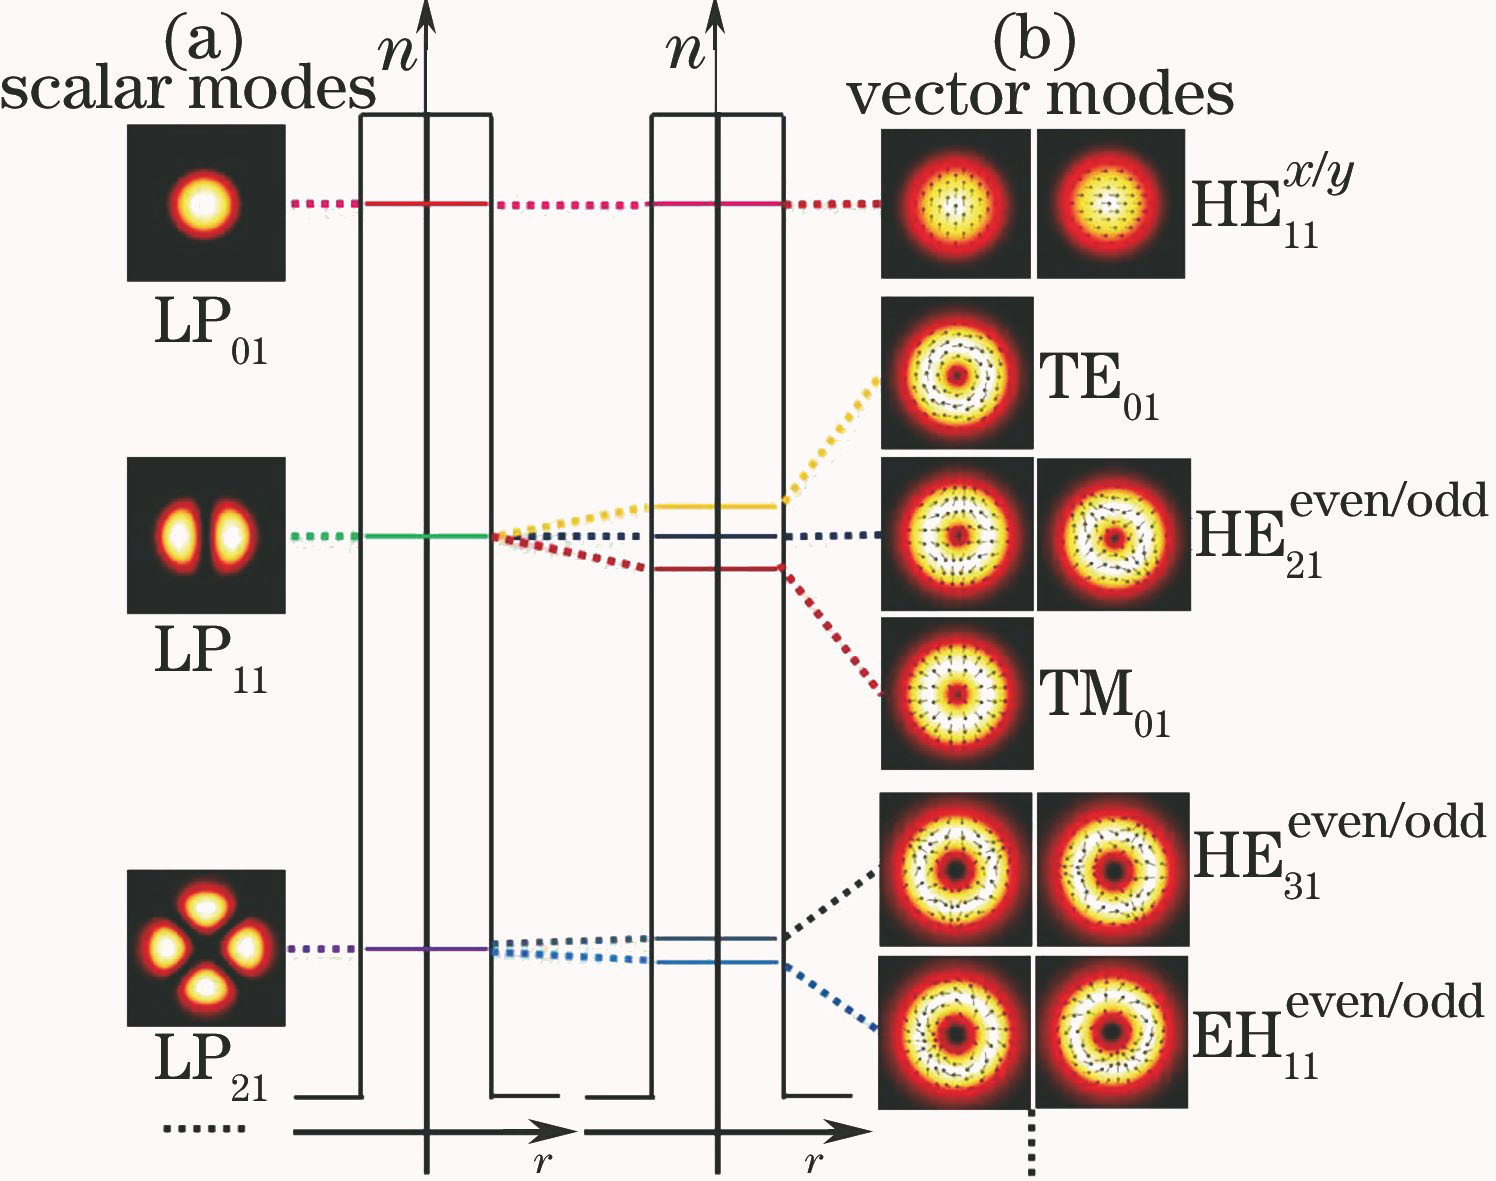 Few-mode fiber[24]. (a) Transverse mode field intensity and effective refractive index in scalar mode; (b) transverse mode field intensity, polarization and effective refractive index in vector mode